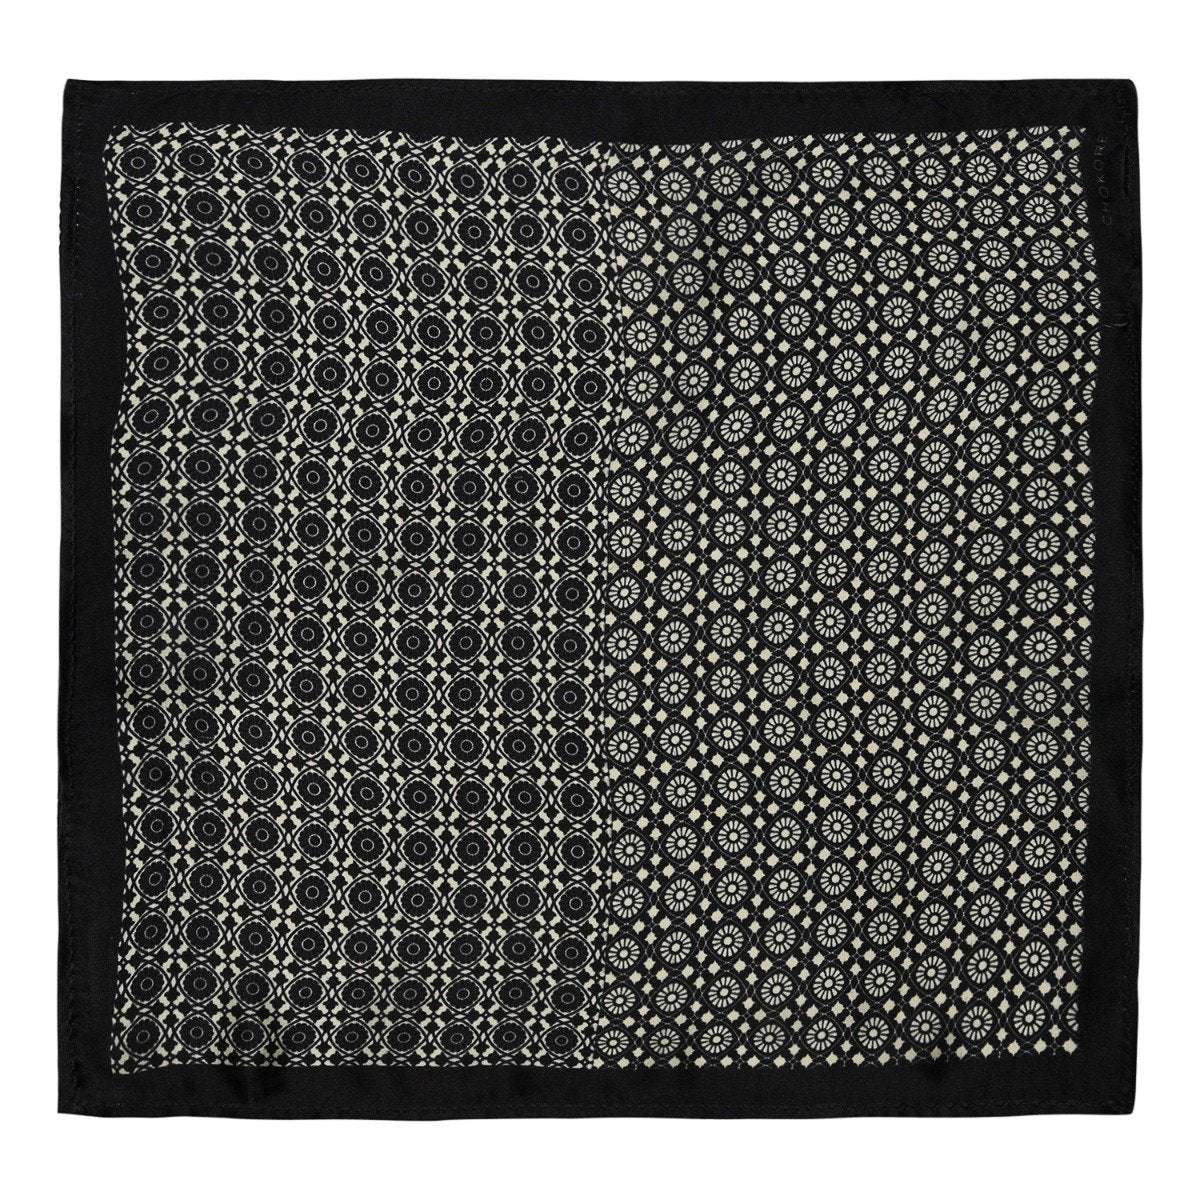 Chokore Black and White Silk Pocket Square -Indian At Heart line